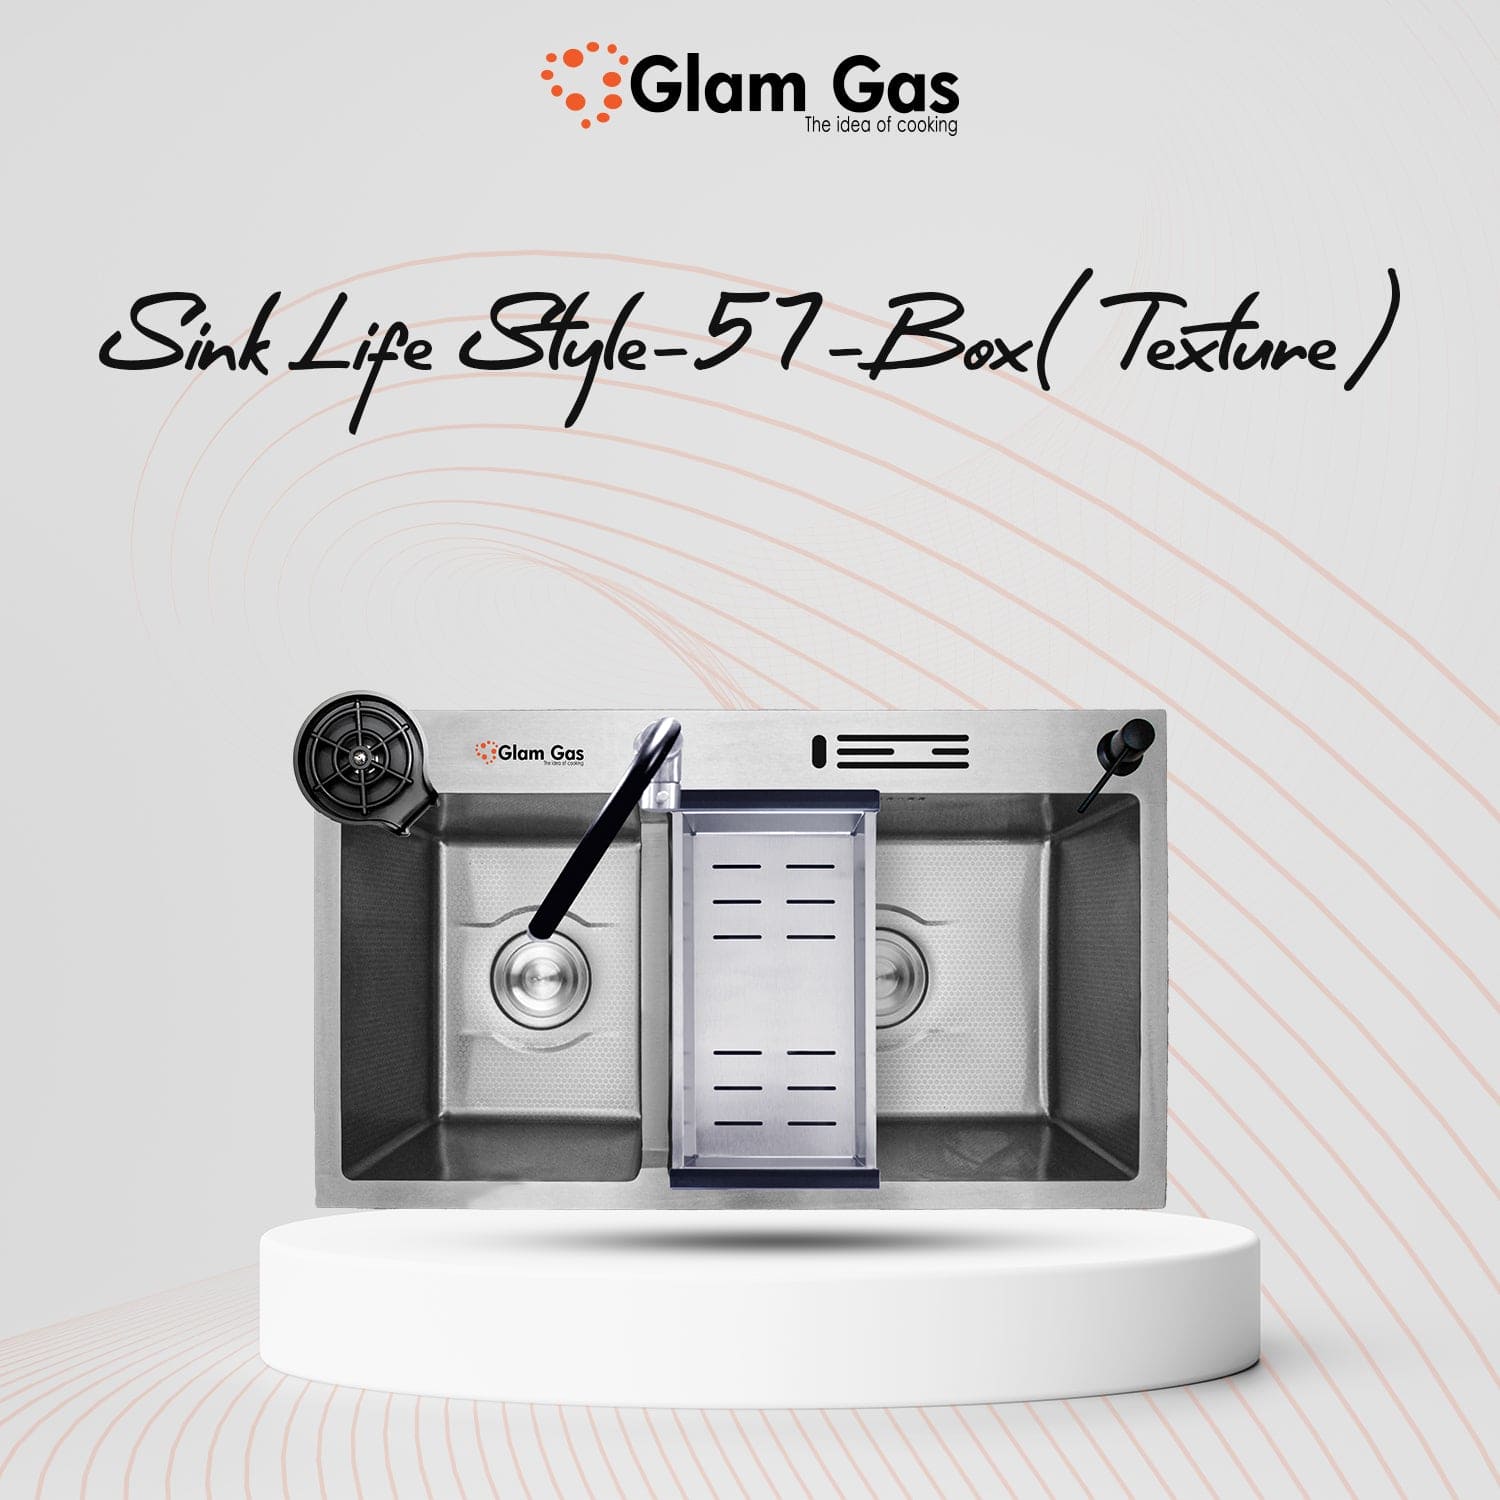 Glam Gas | LIFE STYLE-57-BOX (Texture) Online Buy Now All in Pakistan 